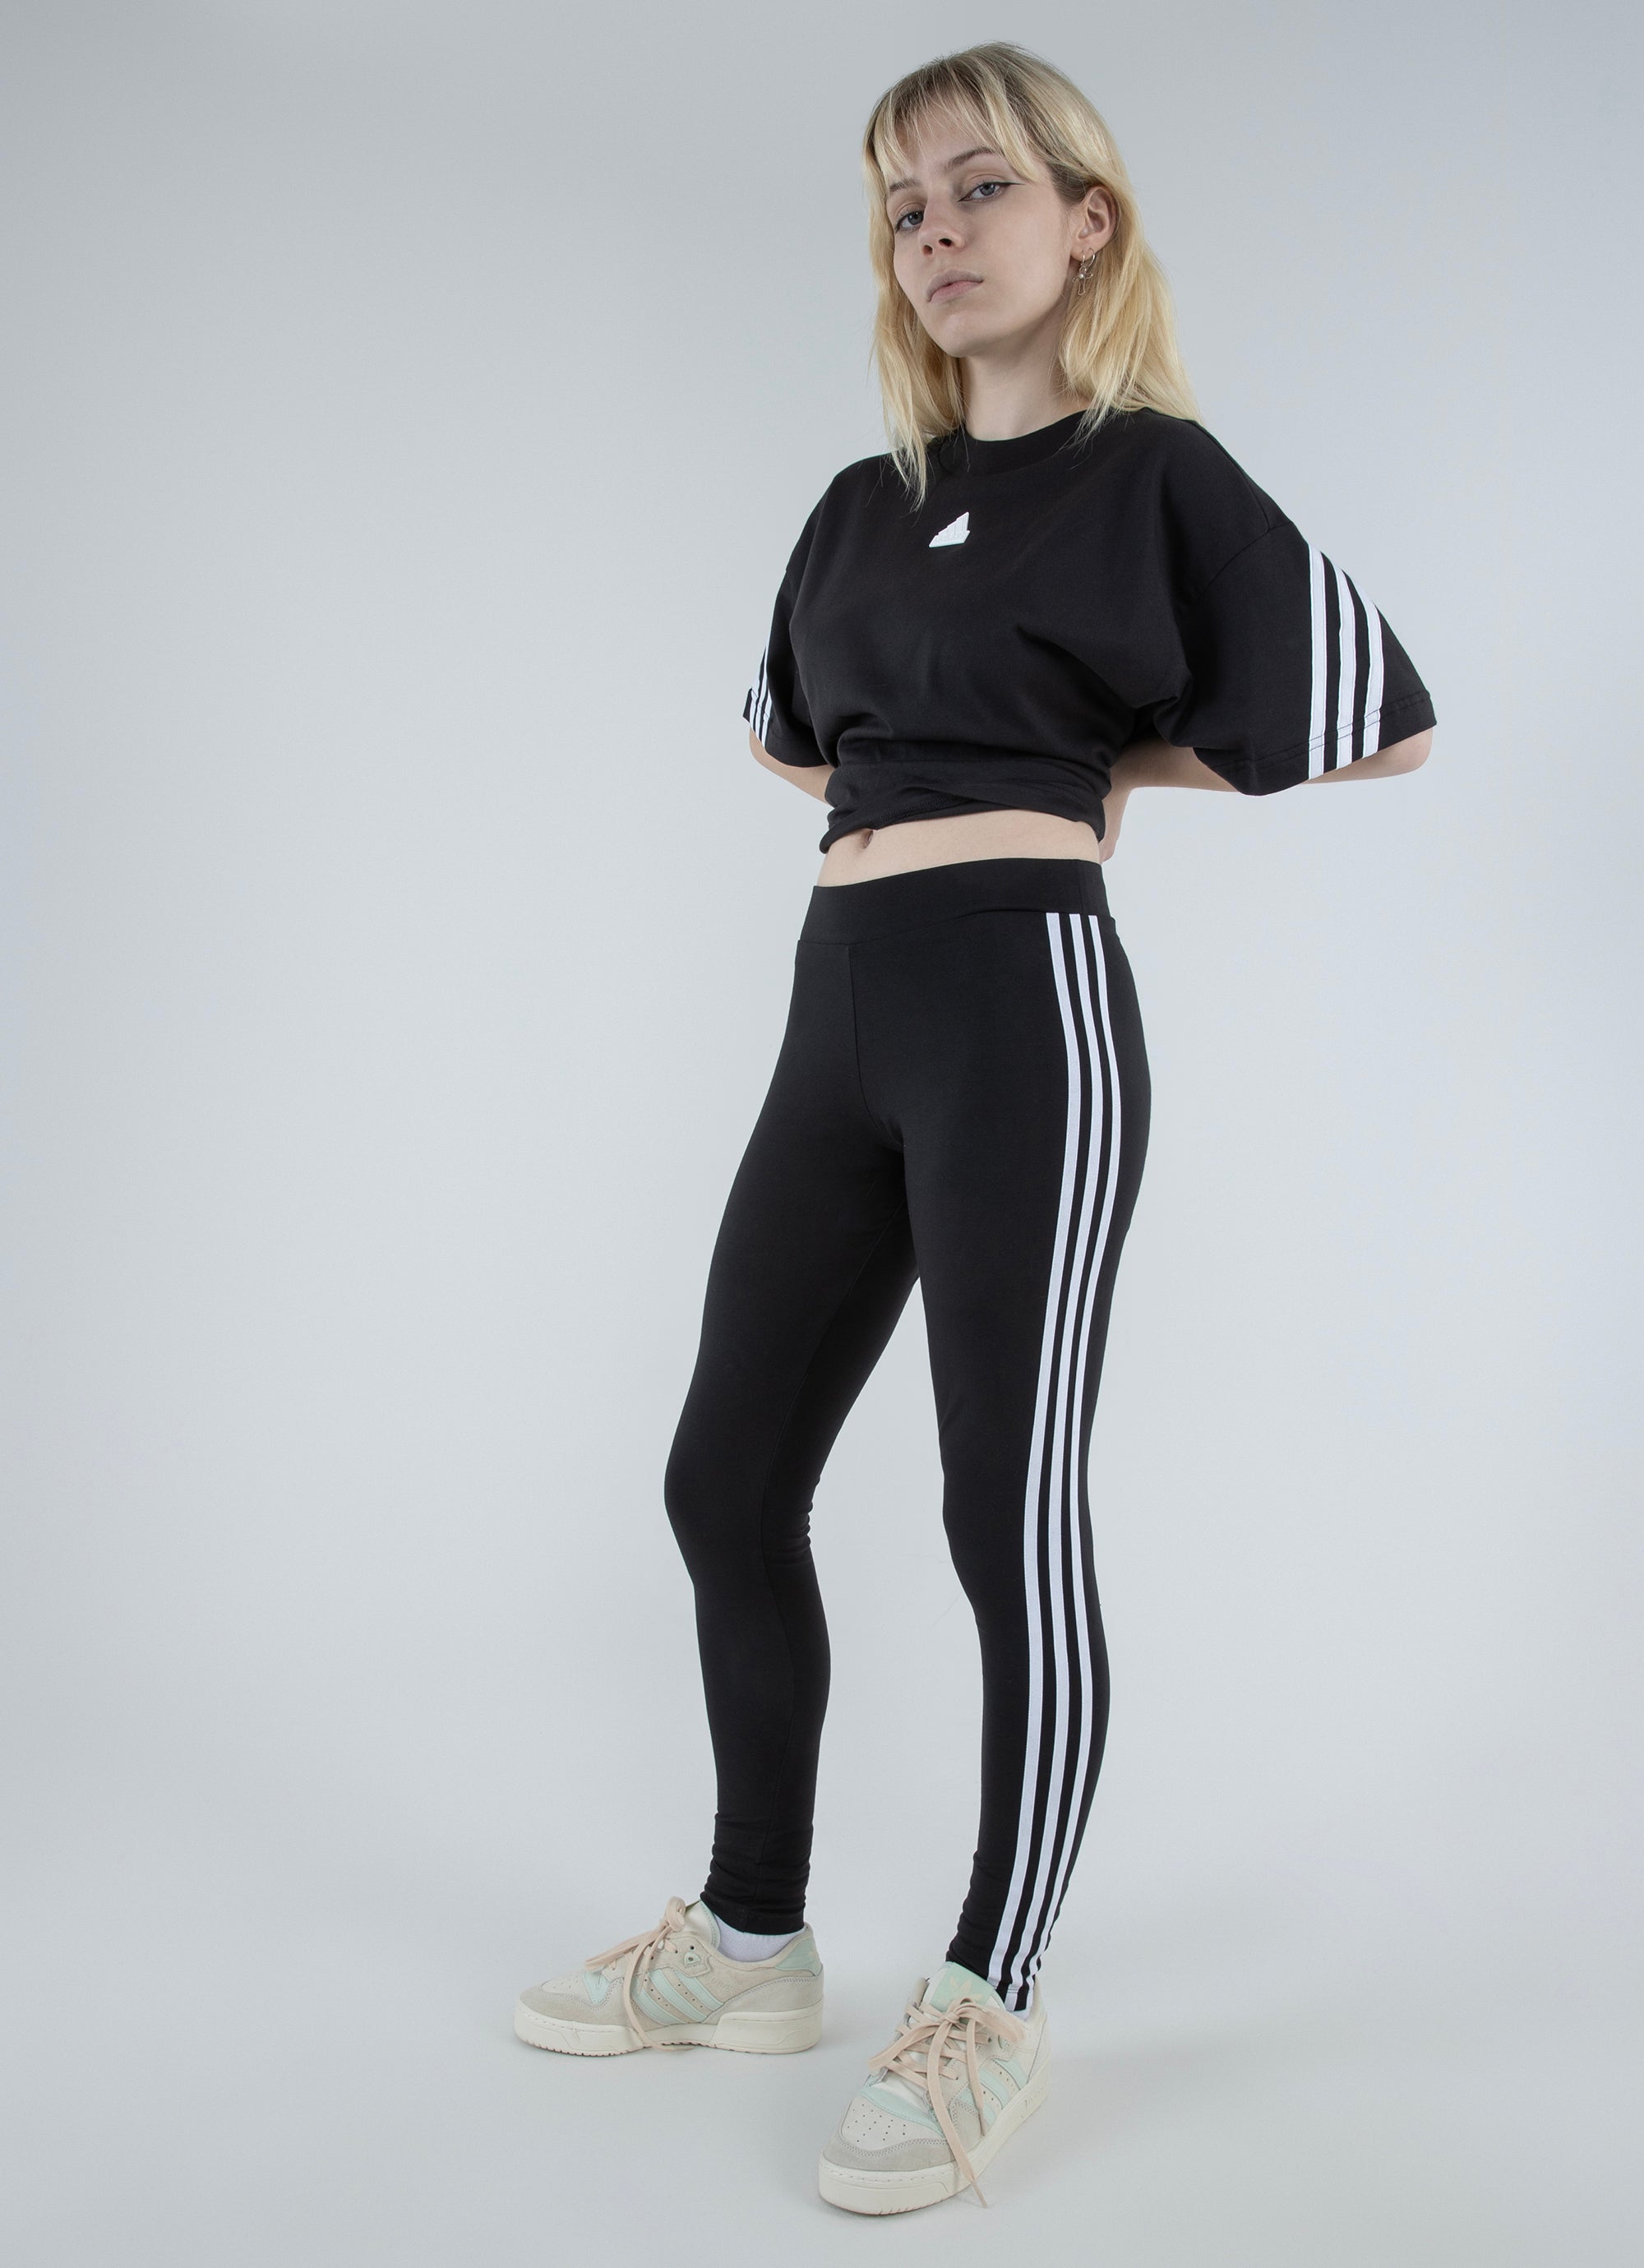 Slide View: 1: adidas Originals 3 Stripes Legging  Outfits with leggings,  Womens printed leggings, Sporty outfits